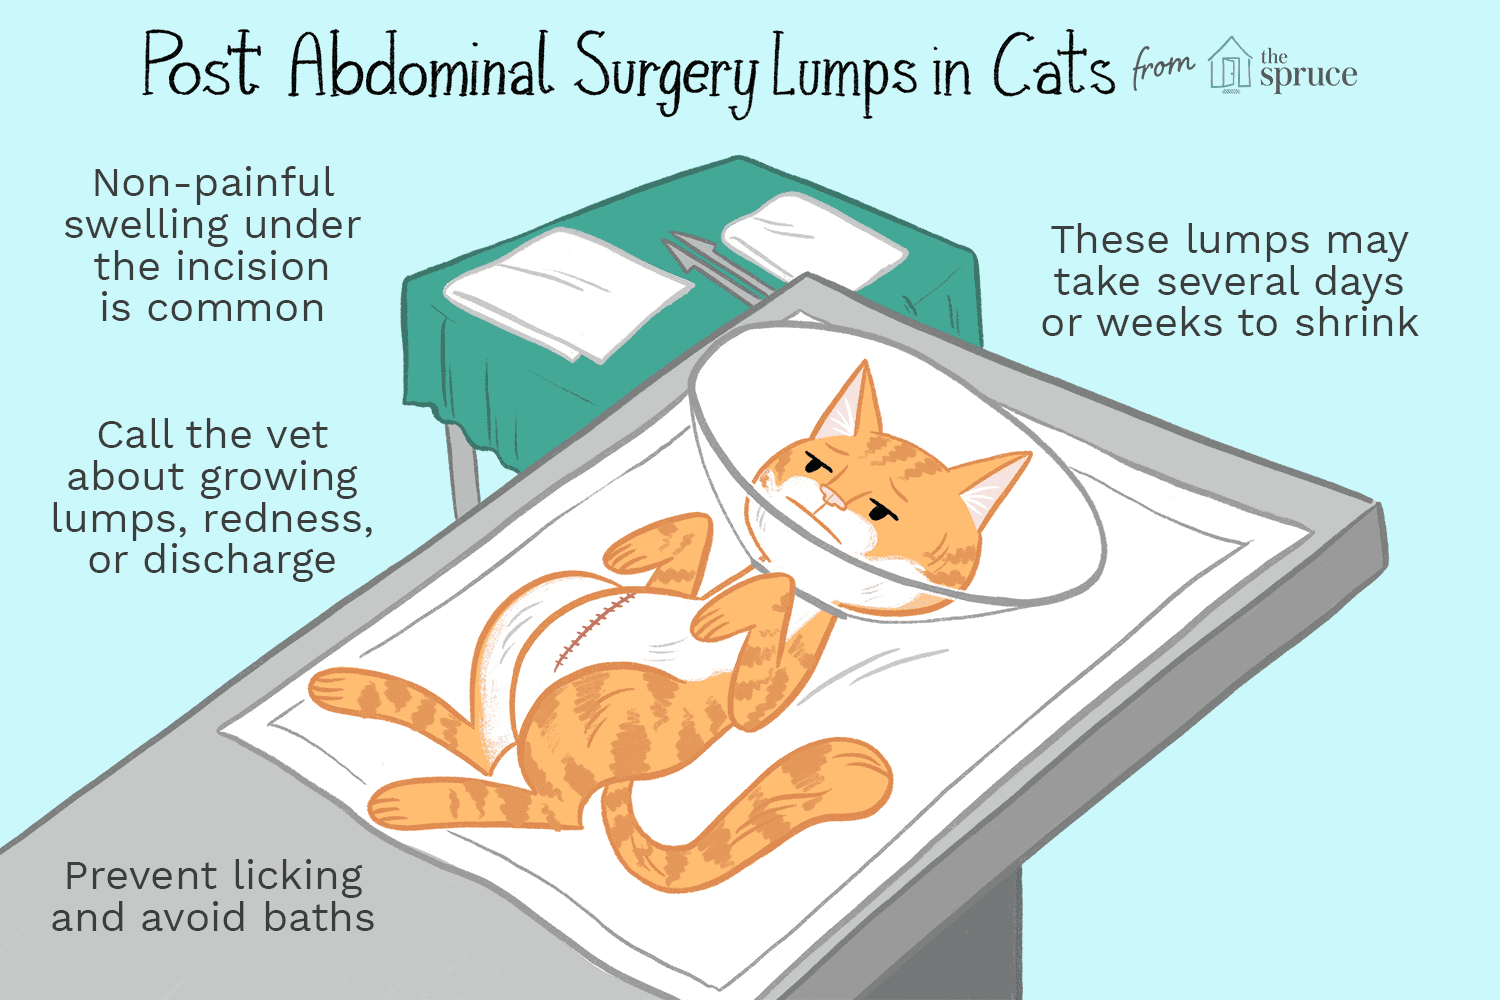 illustration of post-abdominal surgery lumps in cats